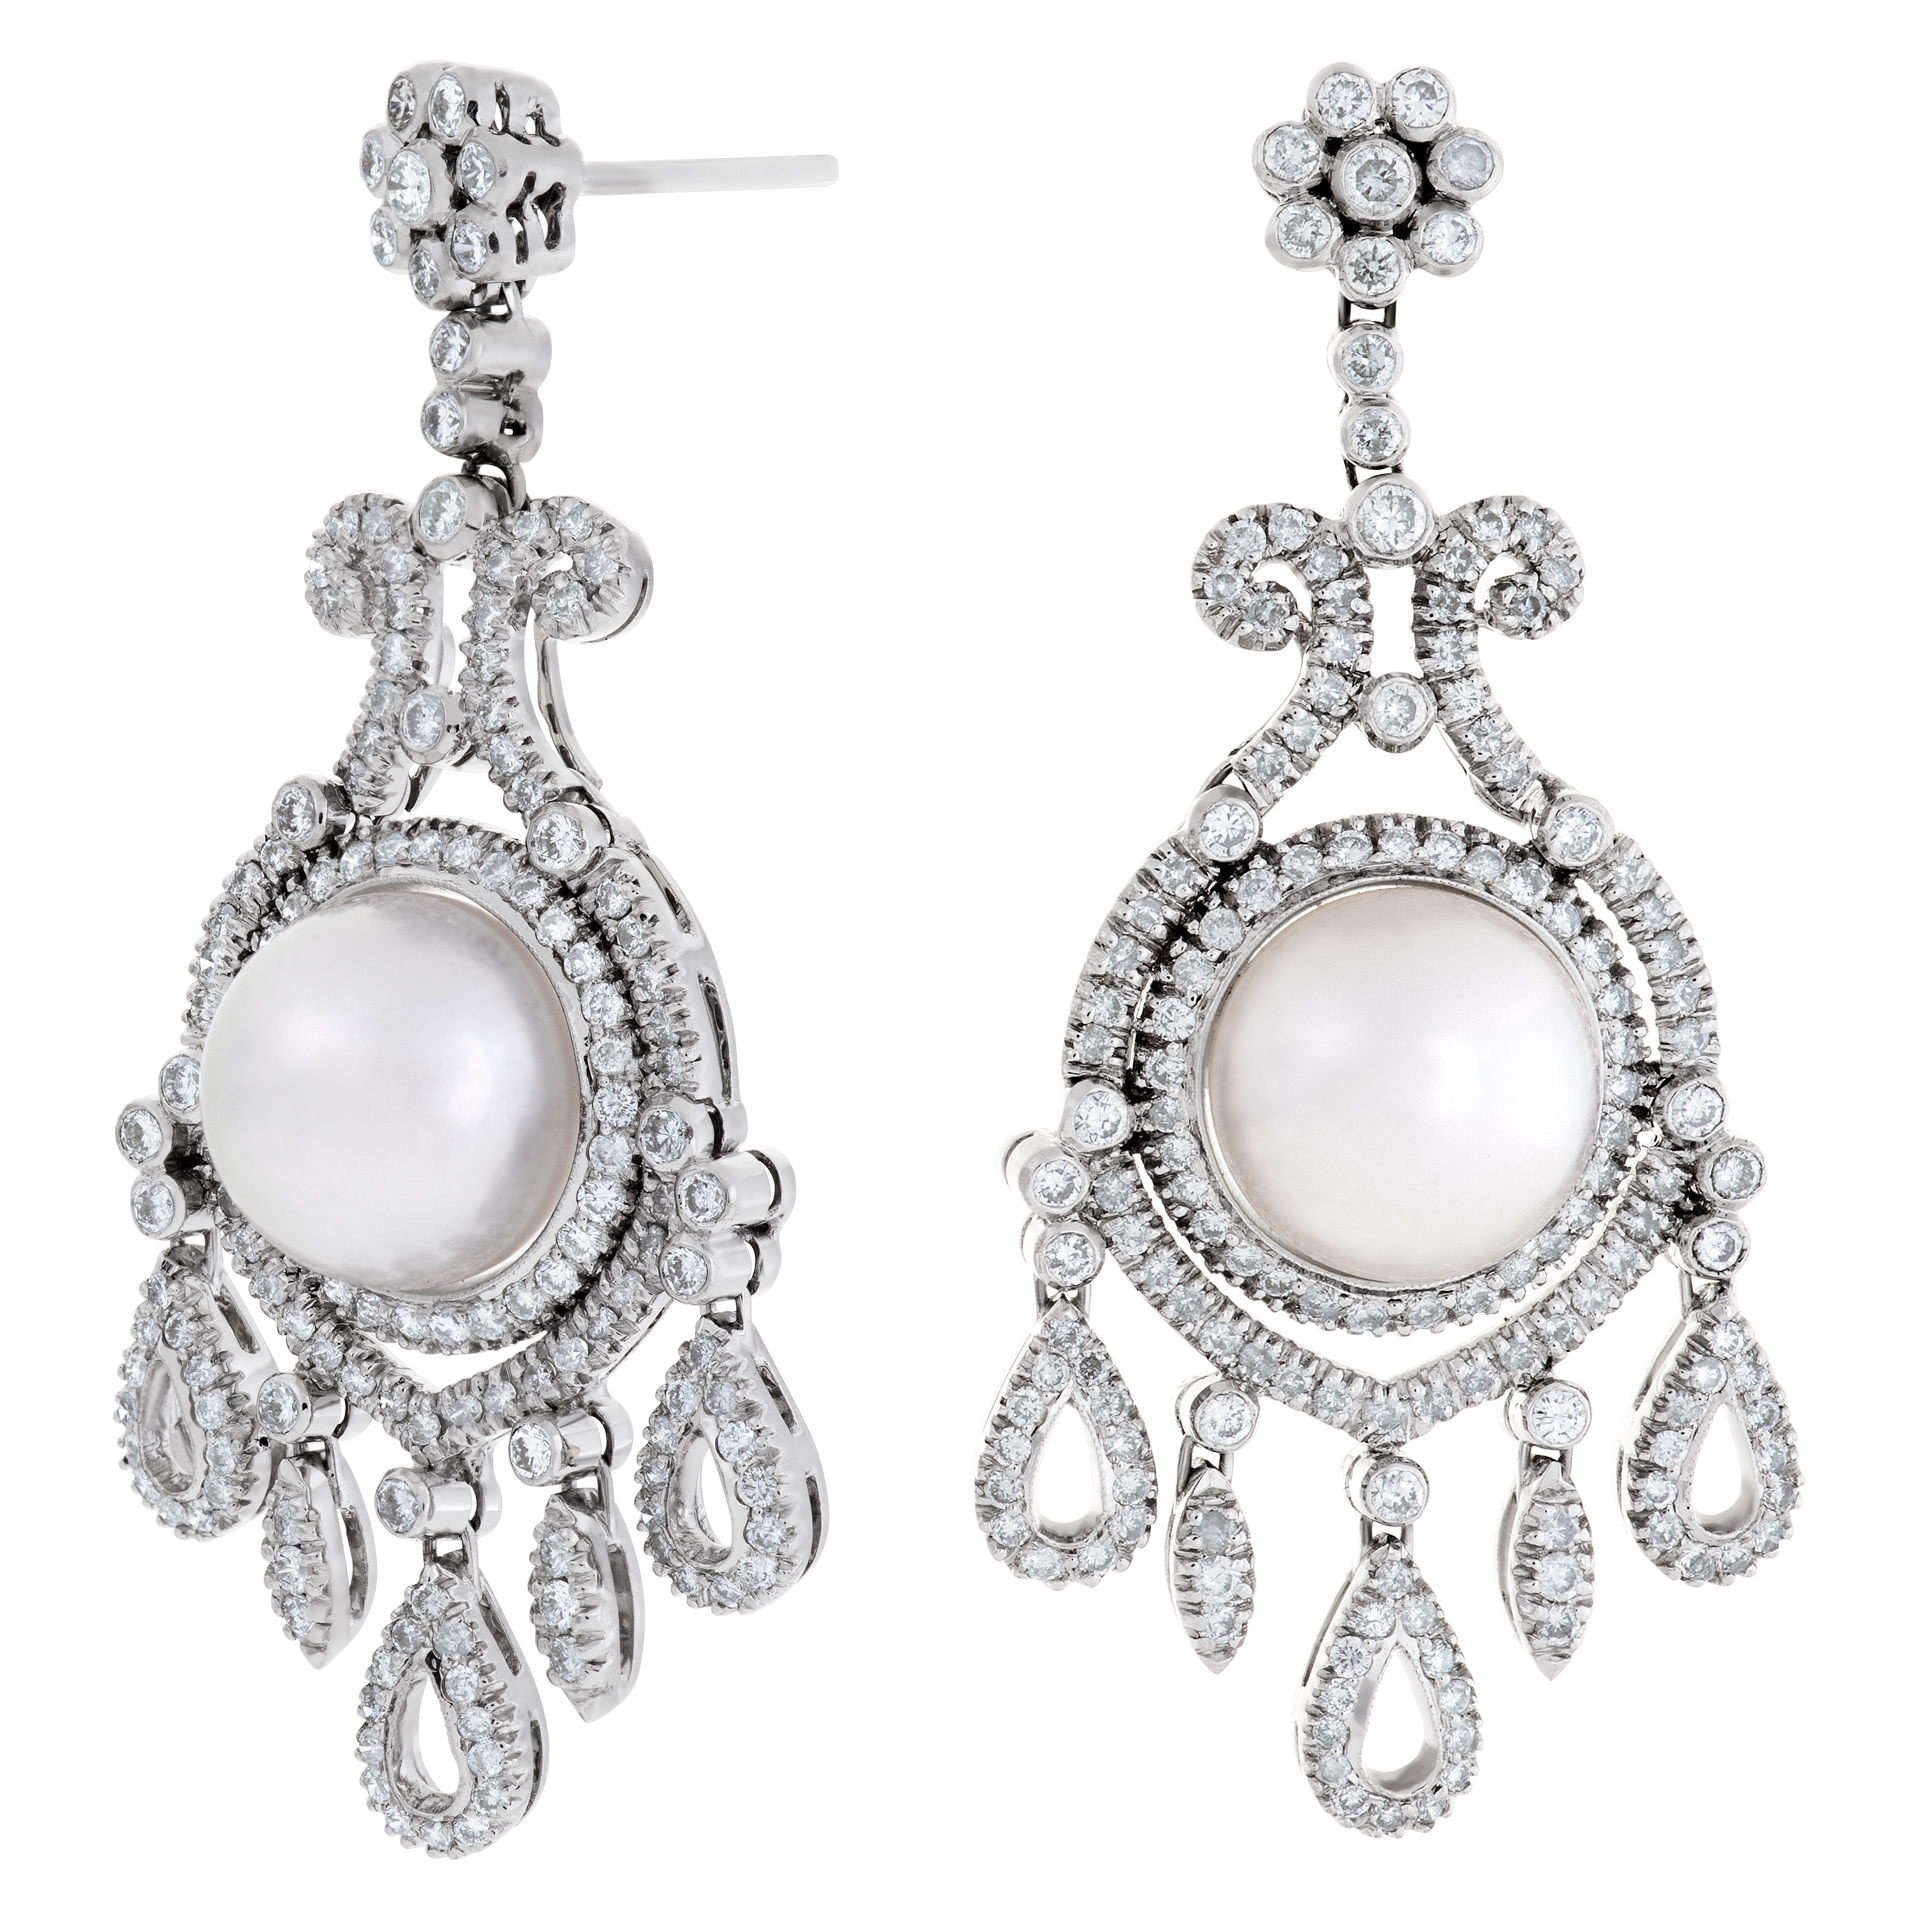 18k white gold pearl earrings with 3.89 carats in diamonds image 1